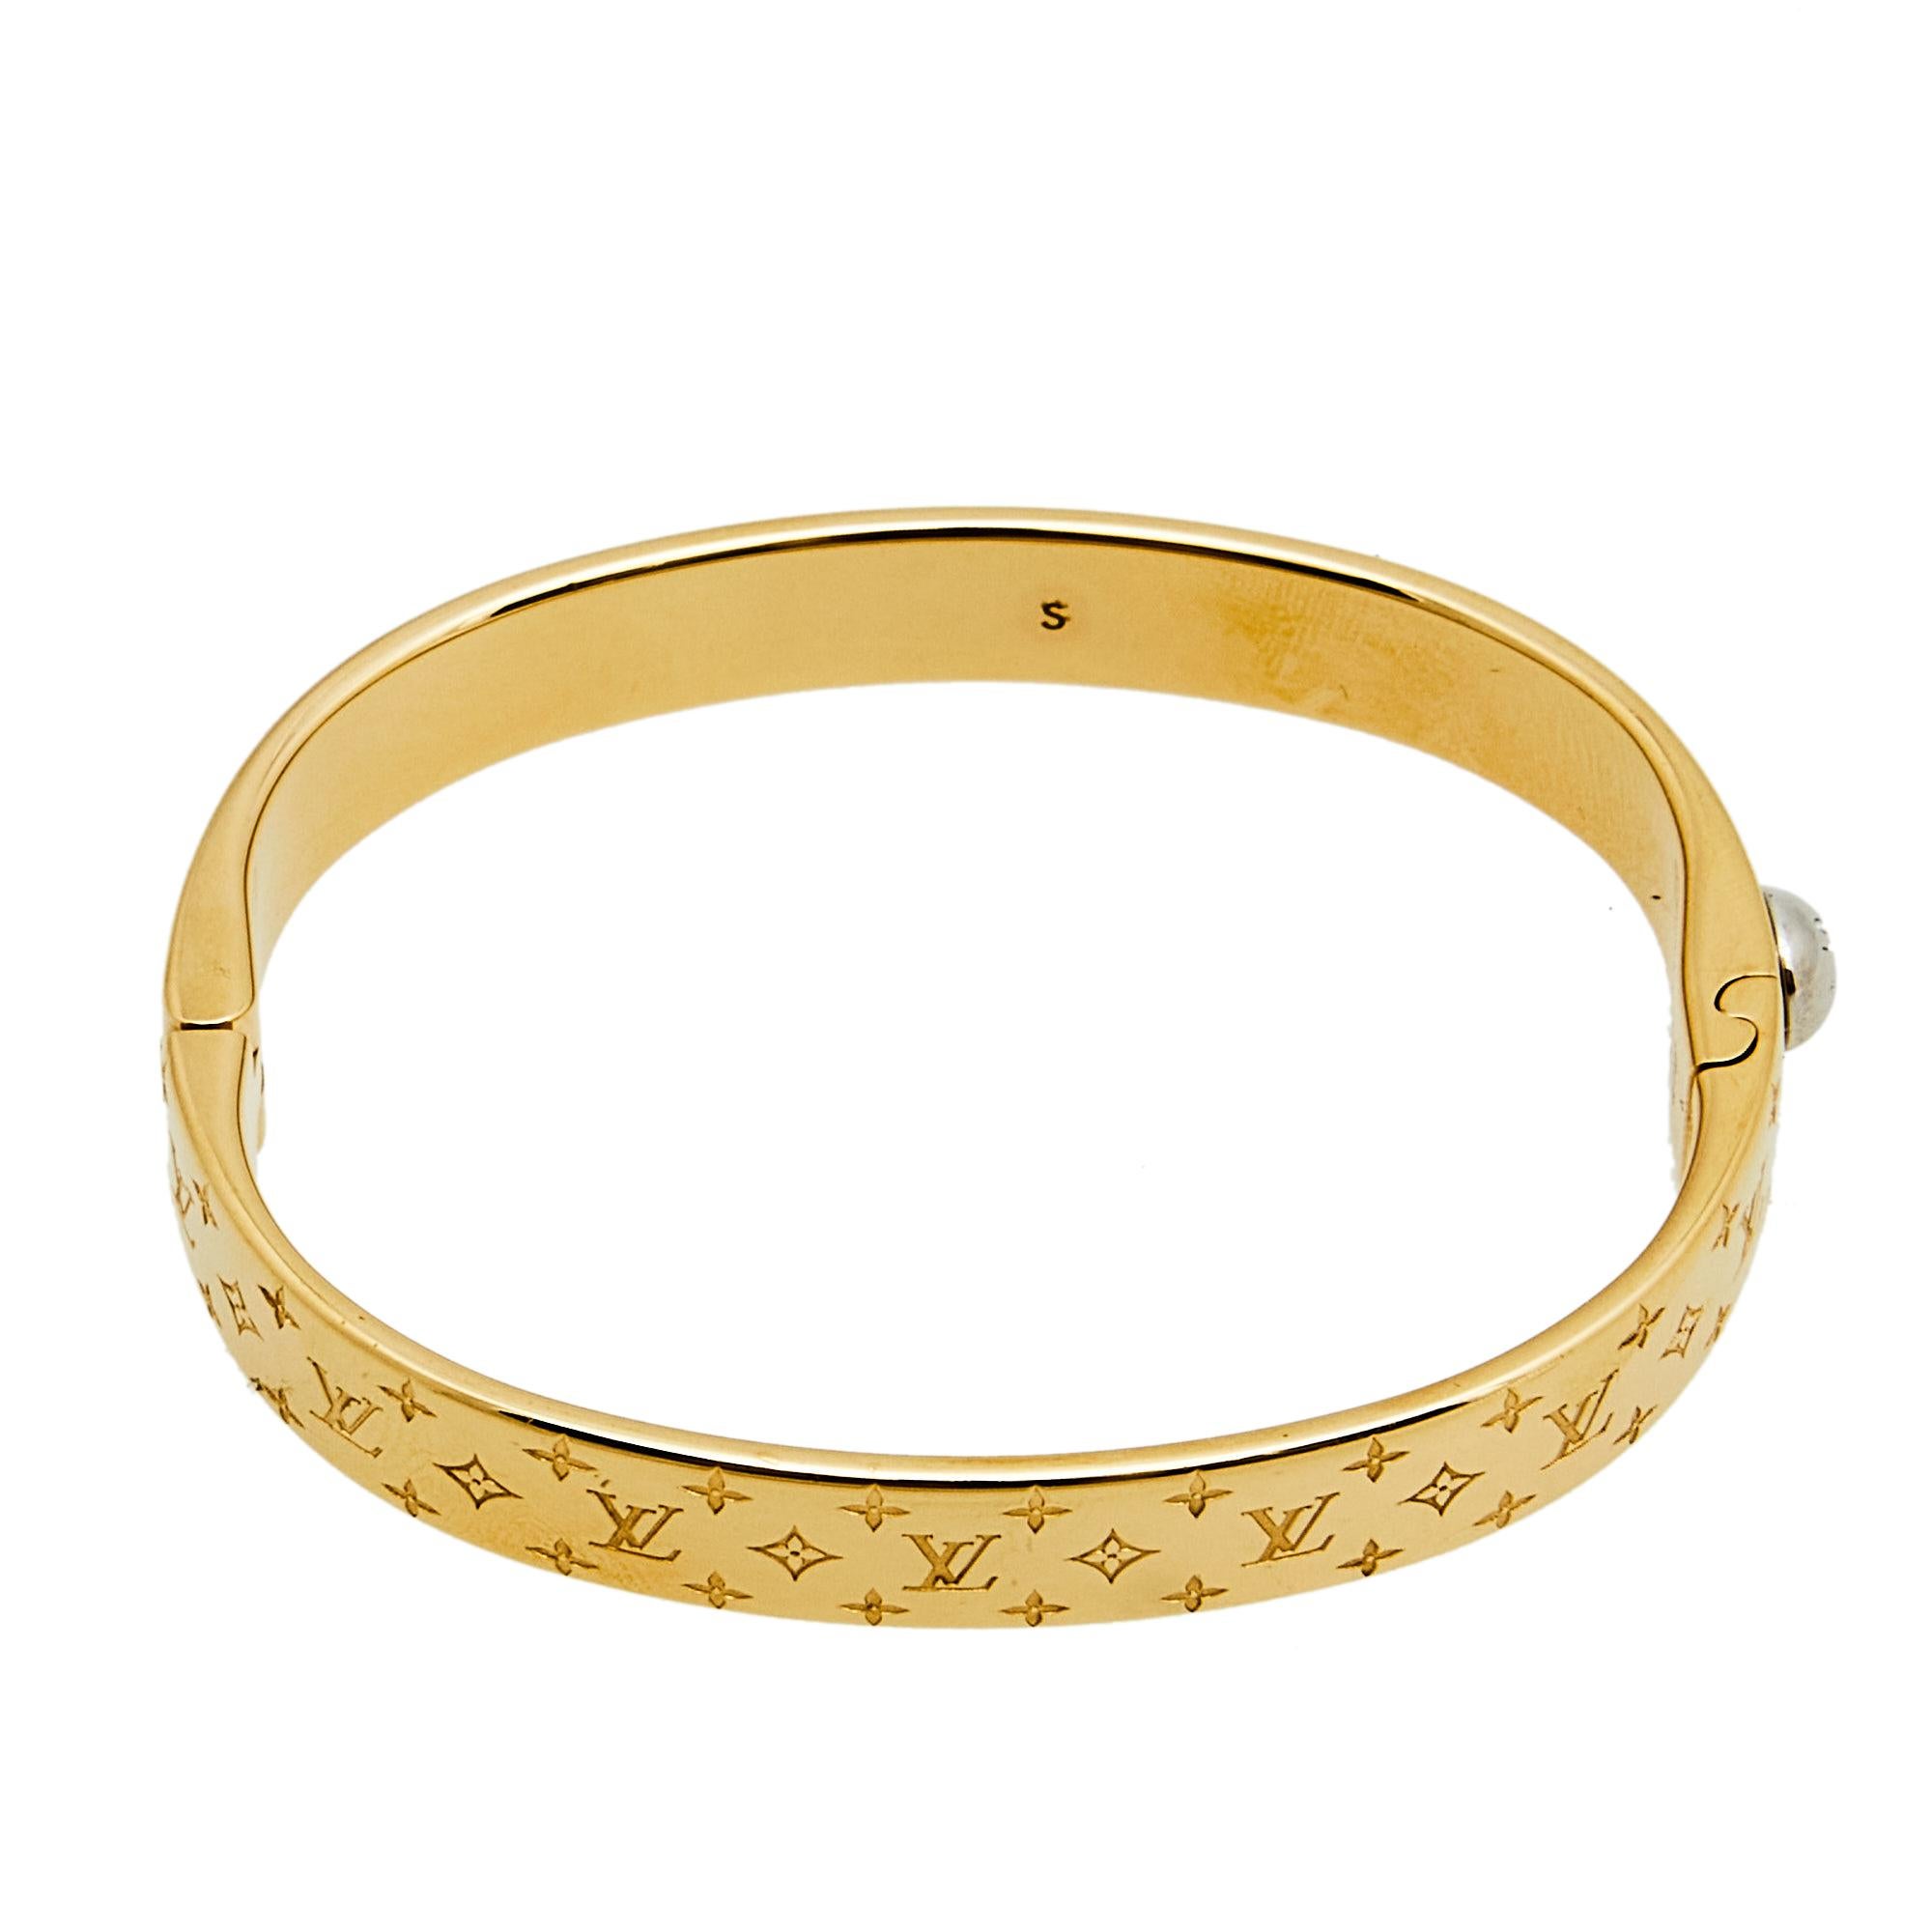 Bound to sit around your wrist and exude beauty, this Louis Vuitton creation is a great buy. It is made from gold-toned metal and engraved with its signature motifs, a pattern well-known and loved by fashion lovers around the world. The bracelet has